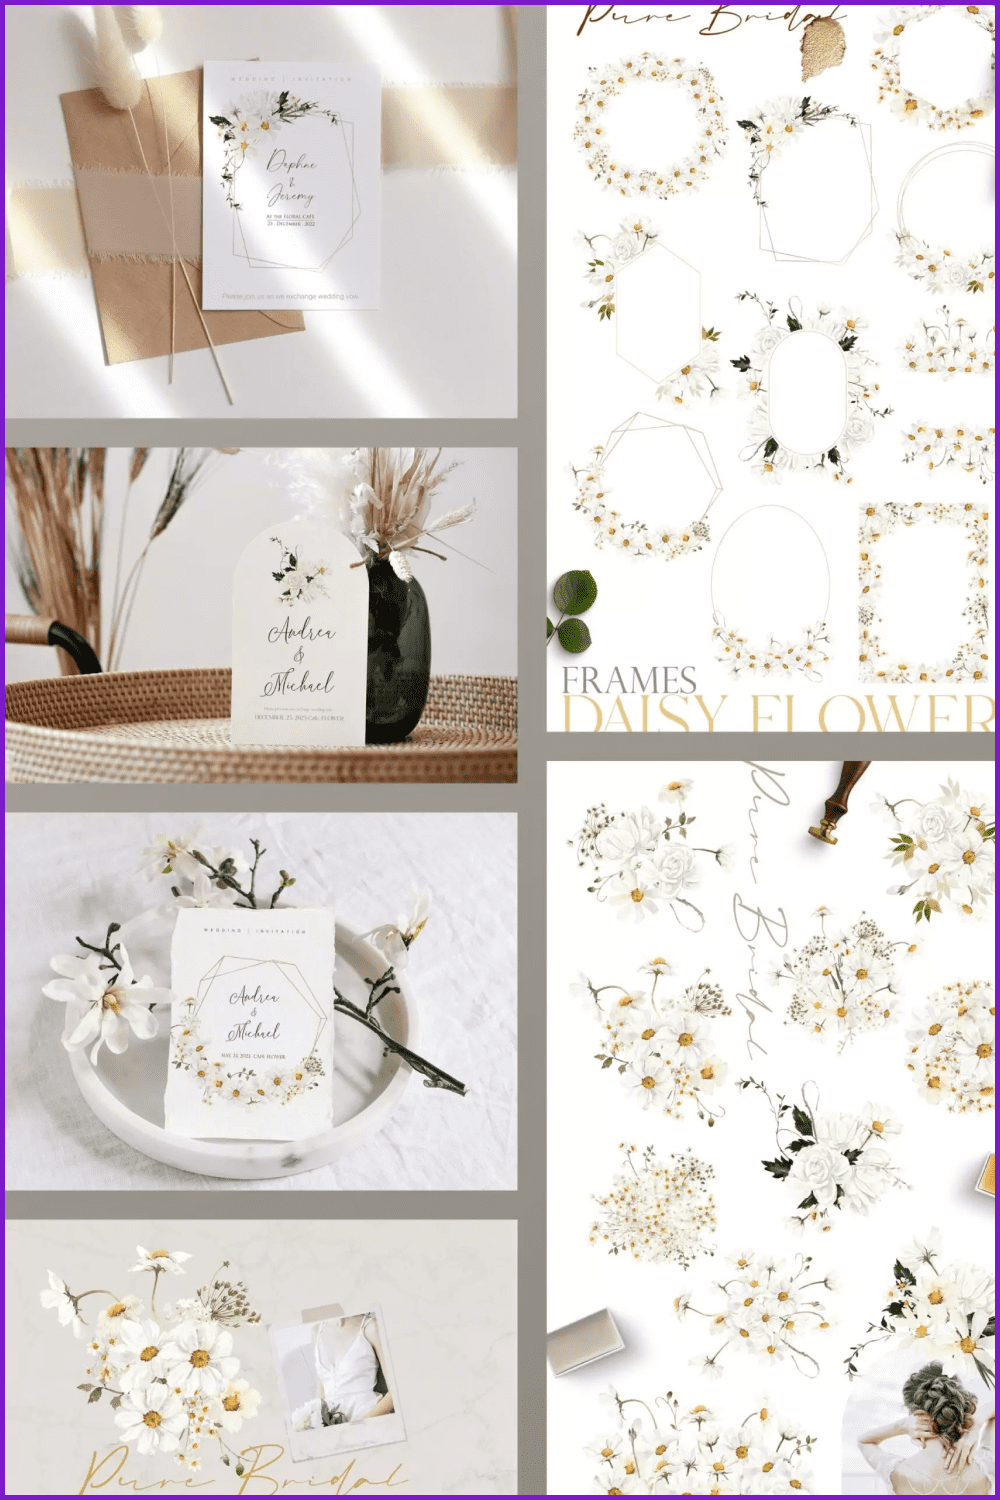 Collage of photos with daisies on cards and bouquets.